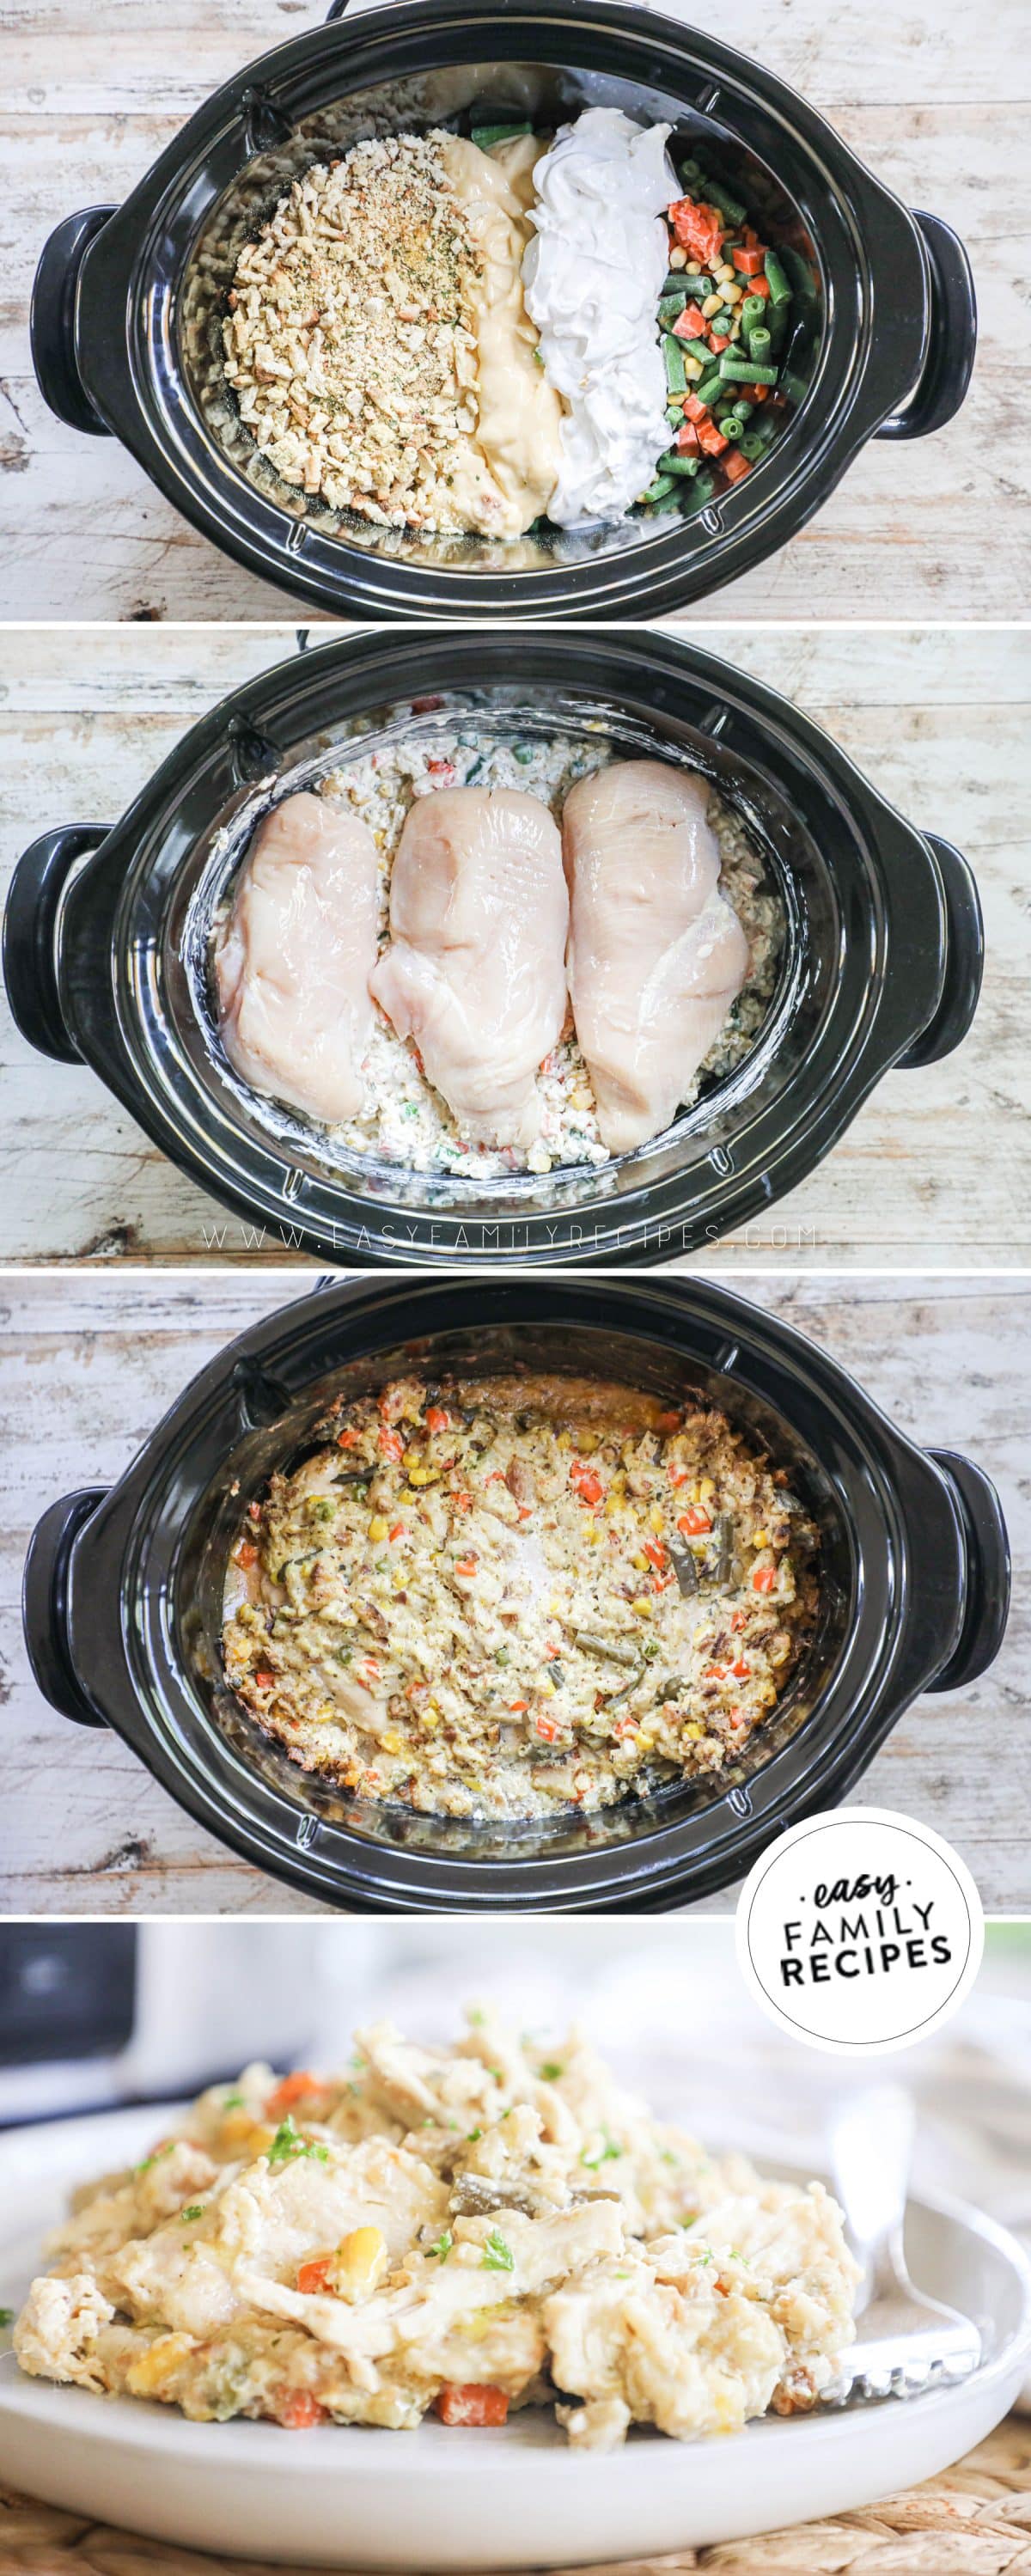 2 image collage of slow cooker chicken and stuffing recipe showing a dish of ingredients before mixed and then the shredded chicken and stuffing mixture after it has cooked for 3-4 hours. 